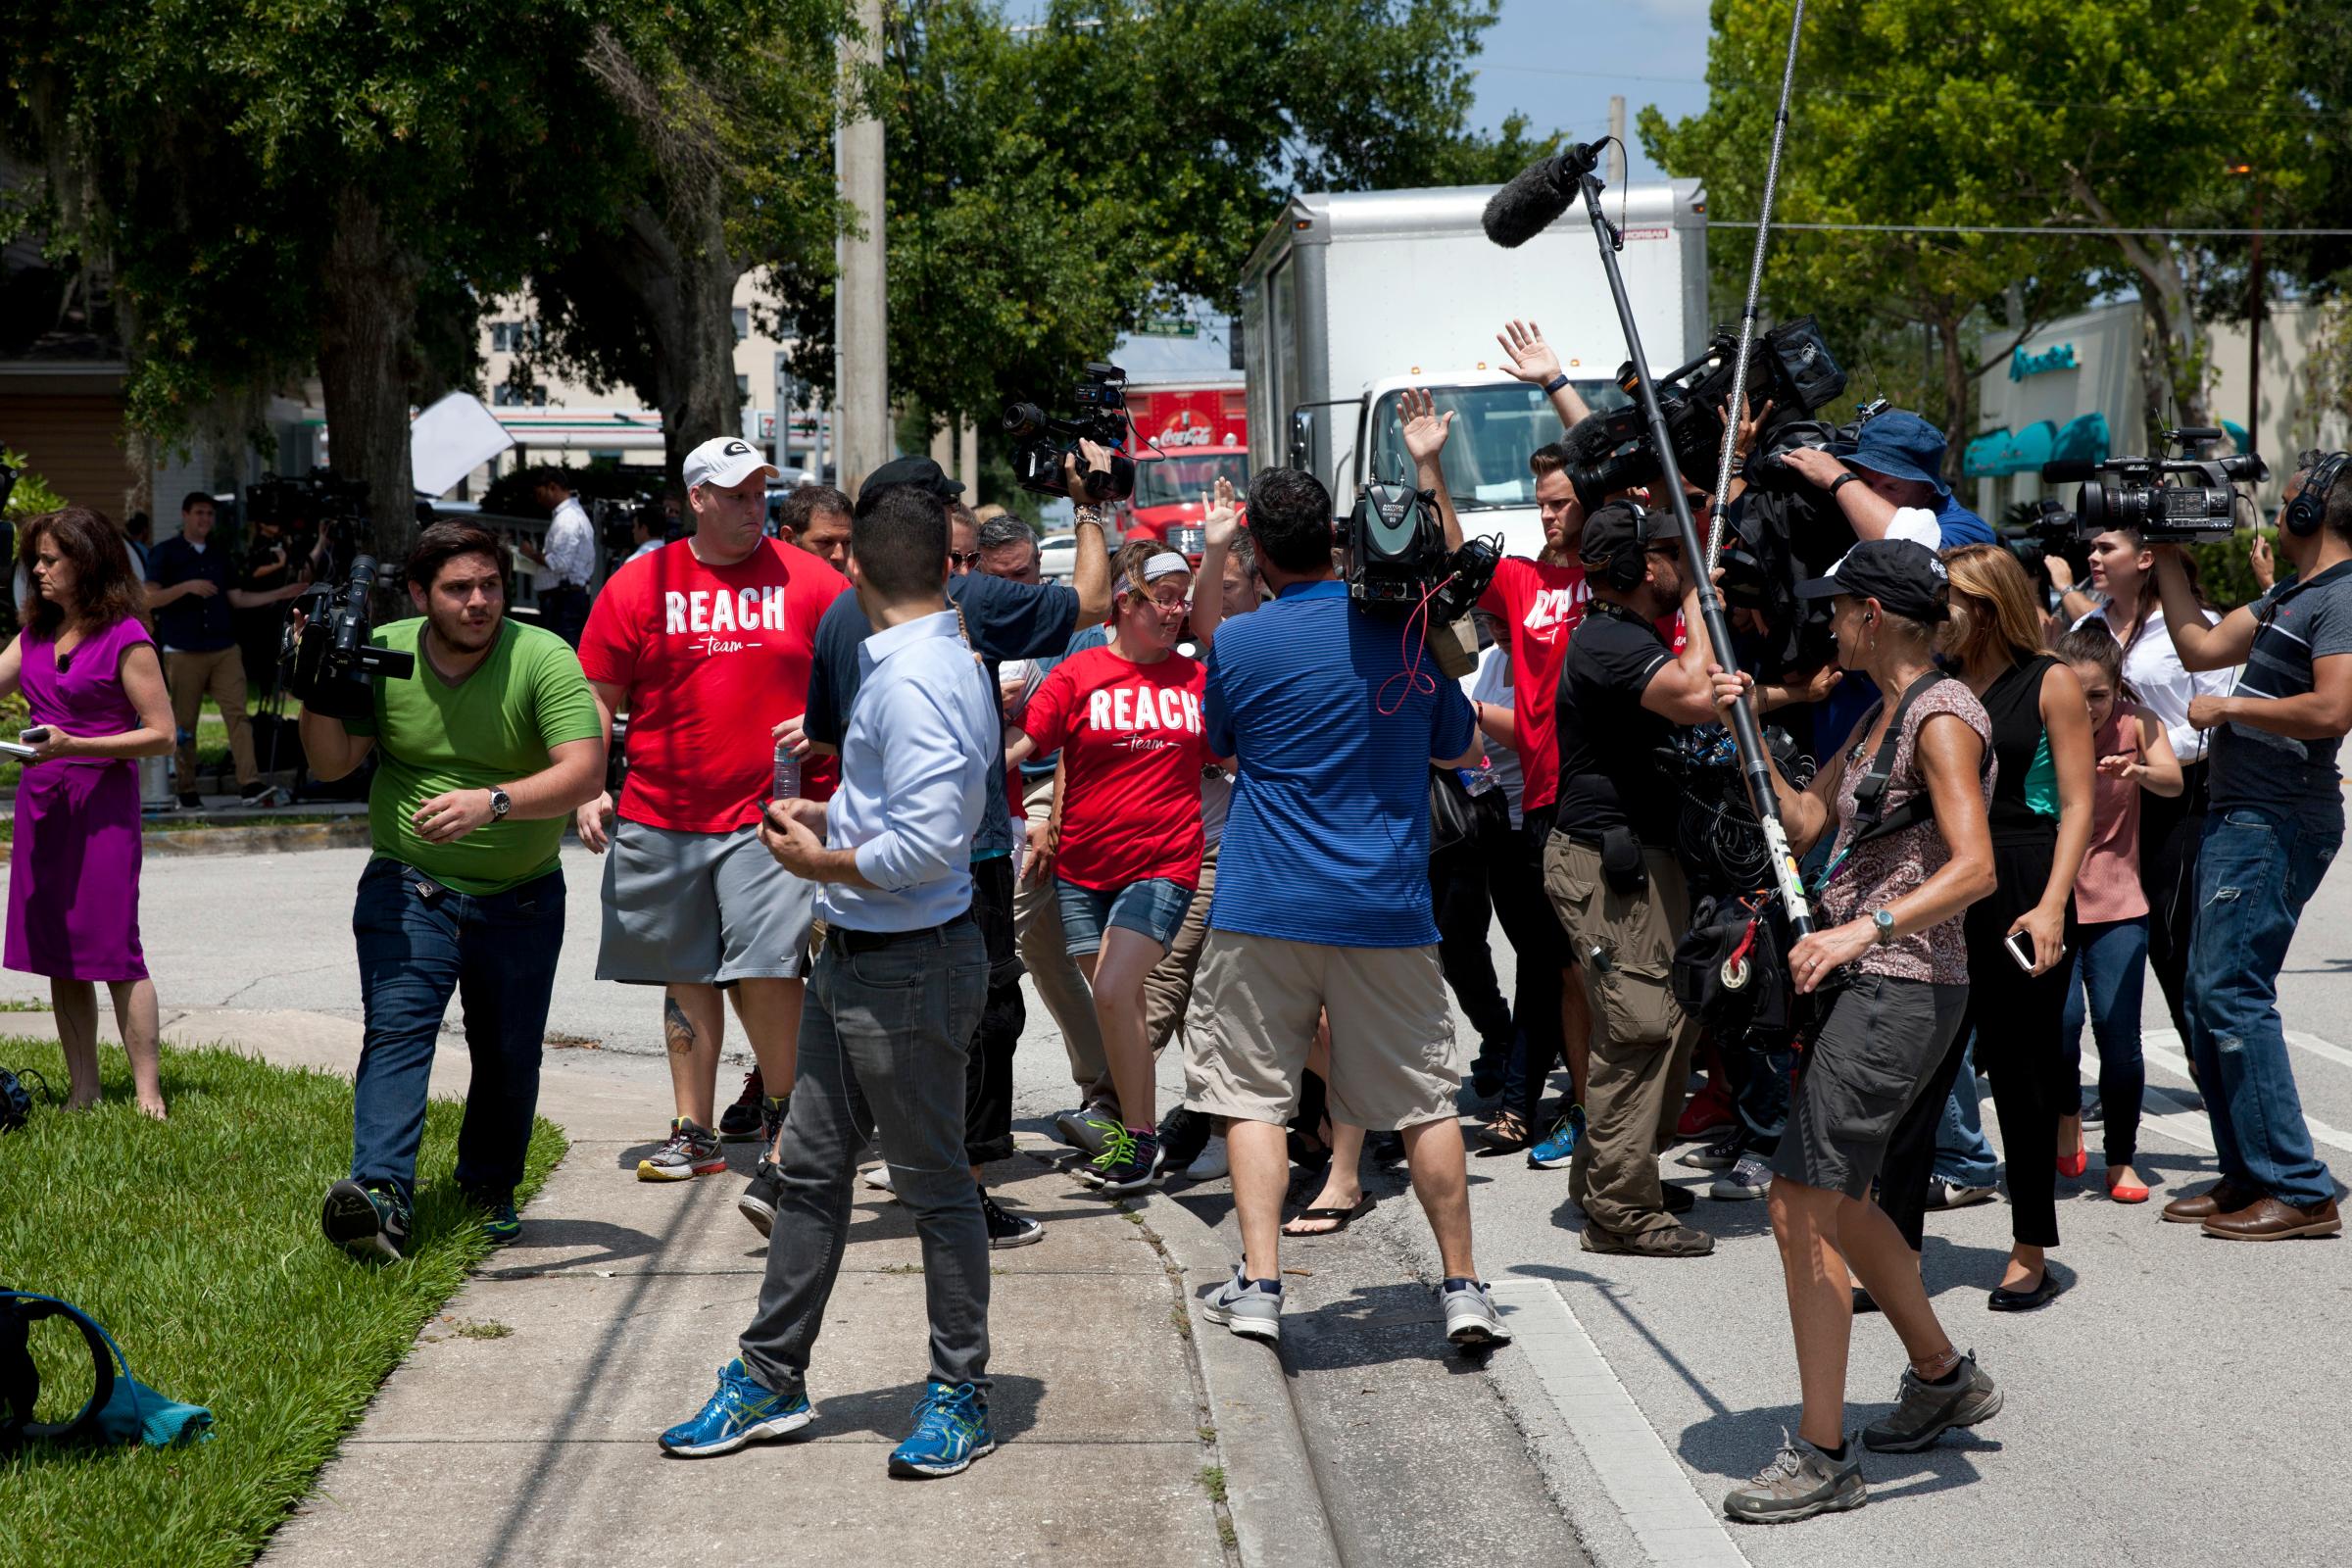 Reporters wait to interview relatives of victims of the Pulse nightclub shooting in Orlando, Fla., on June 13, 2016.